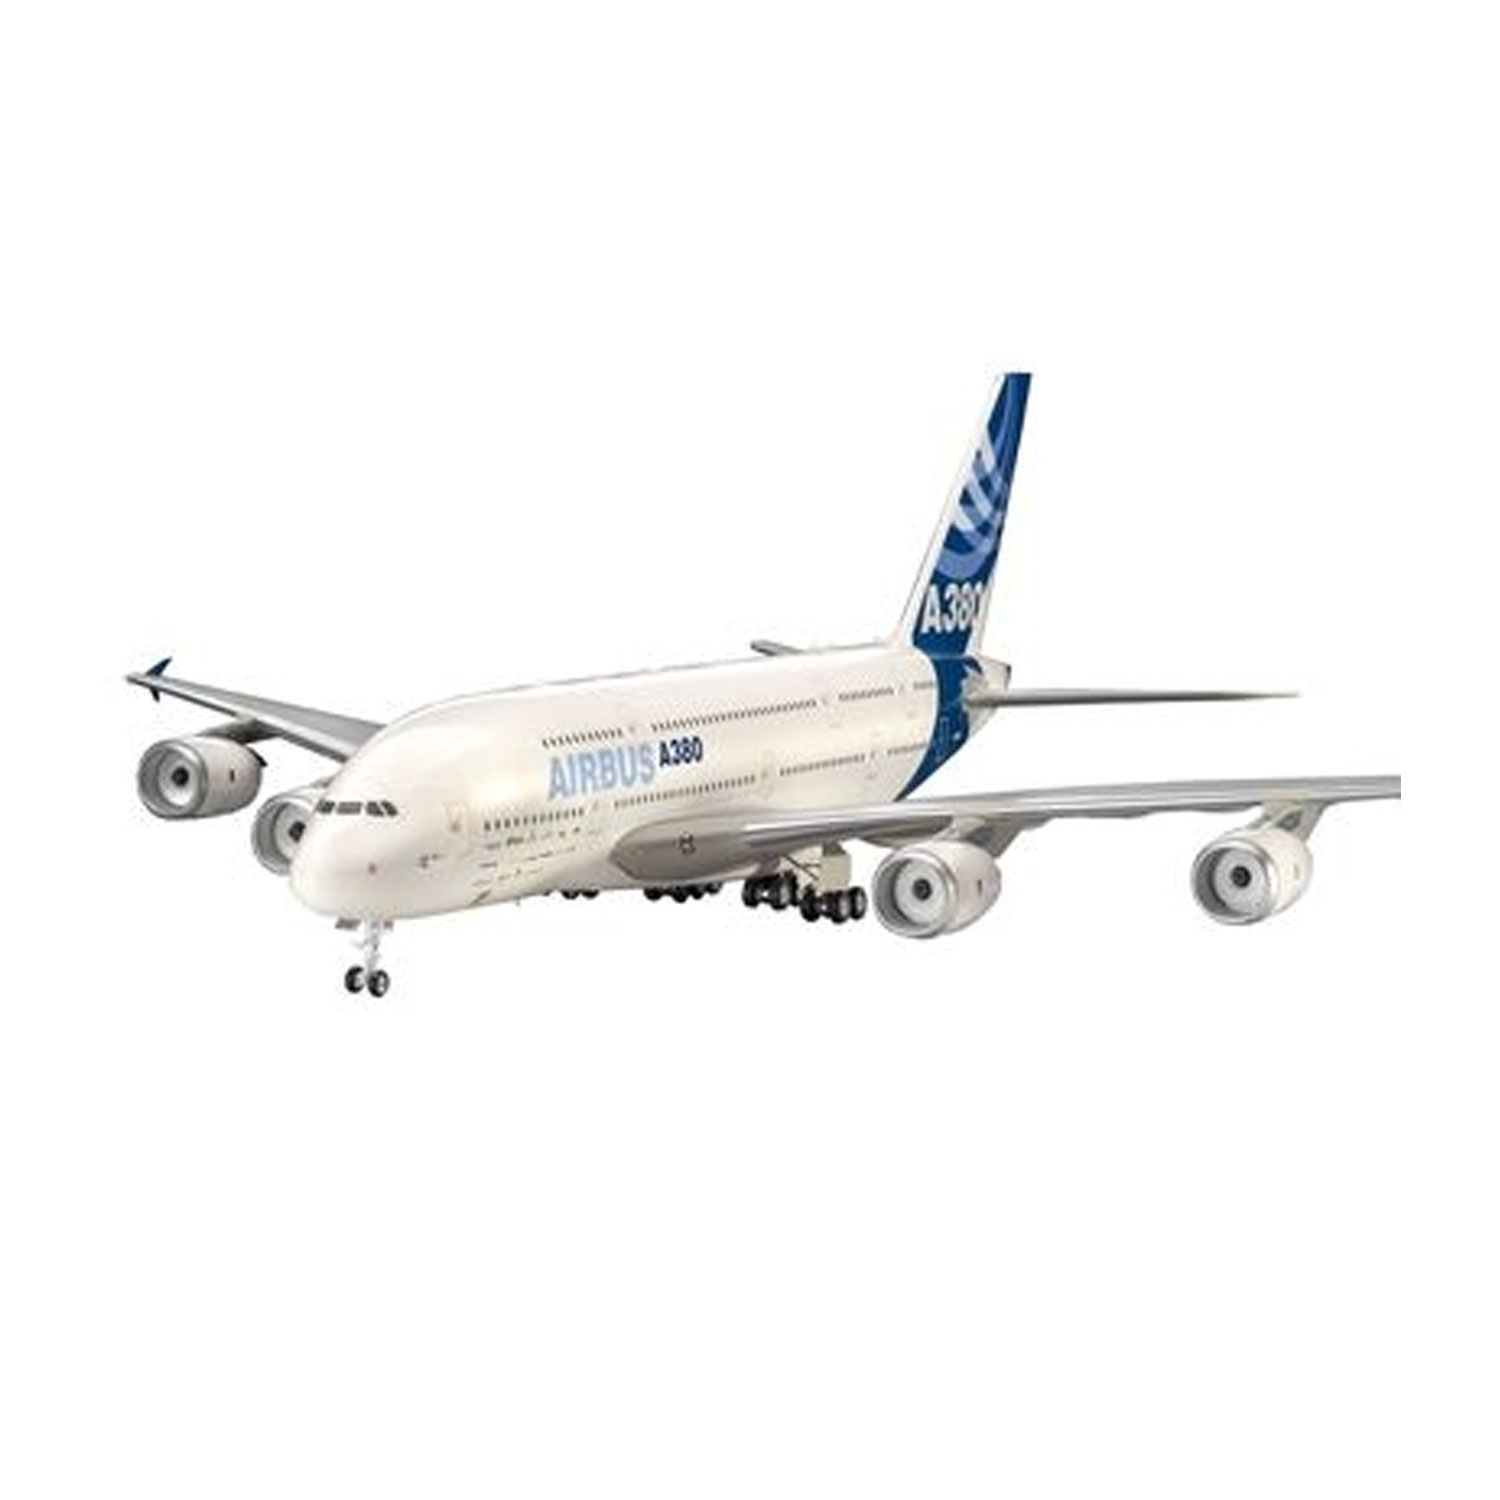 Maquette avion : Airbus A380 New livery First Flight